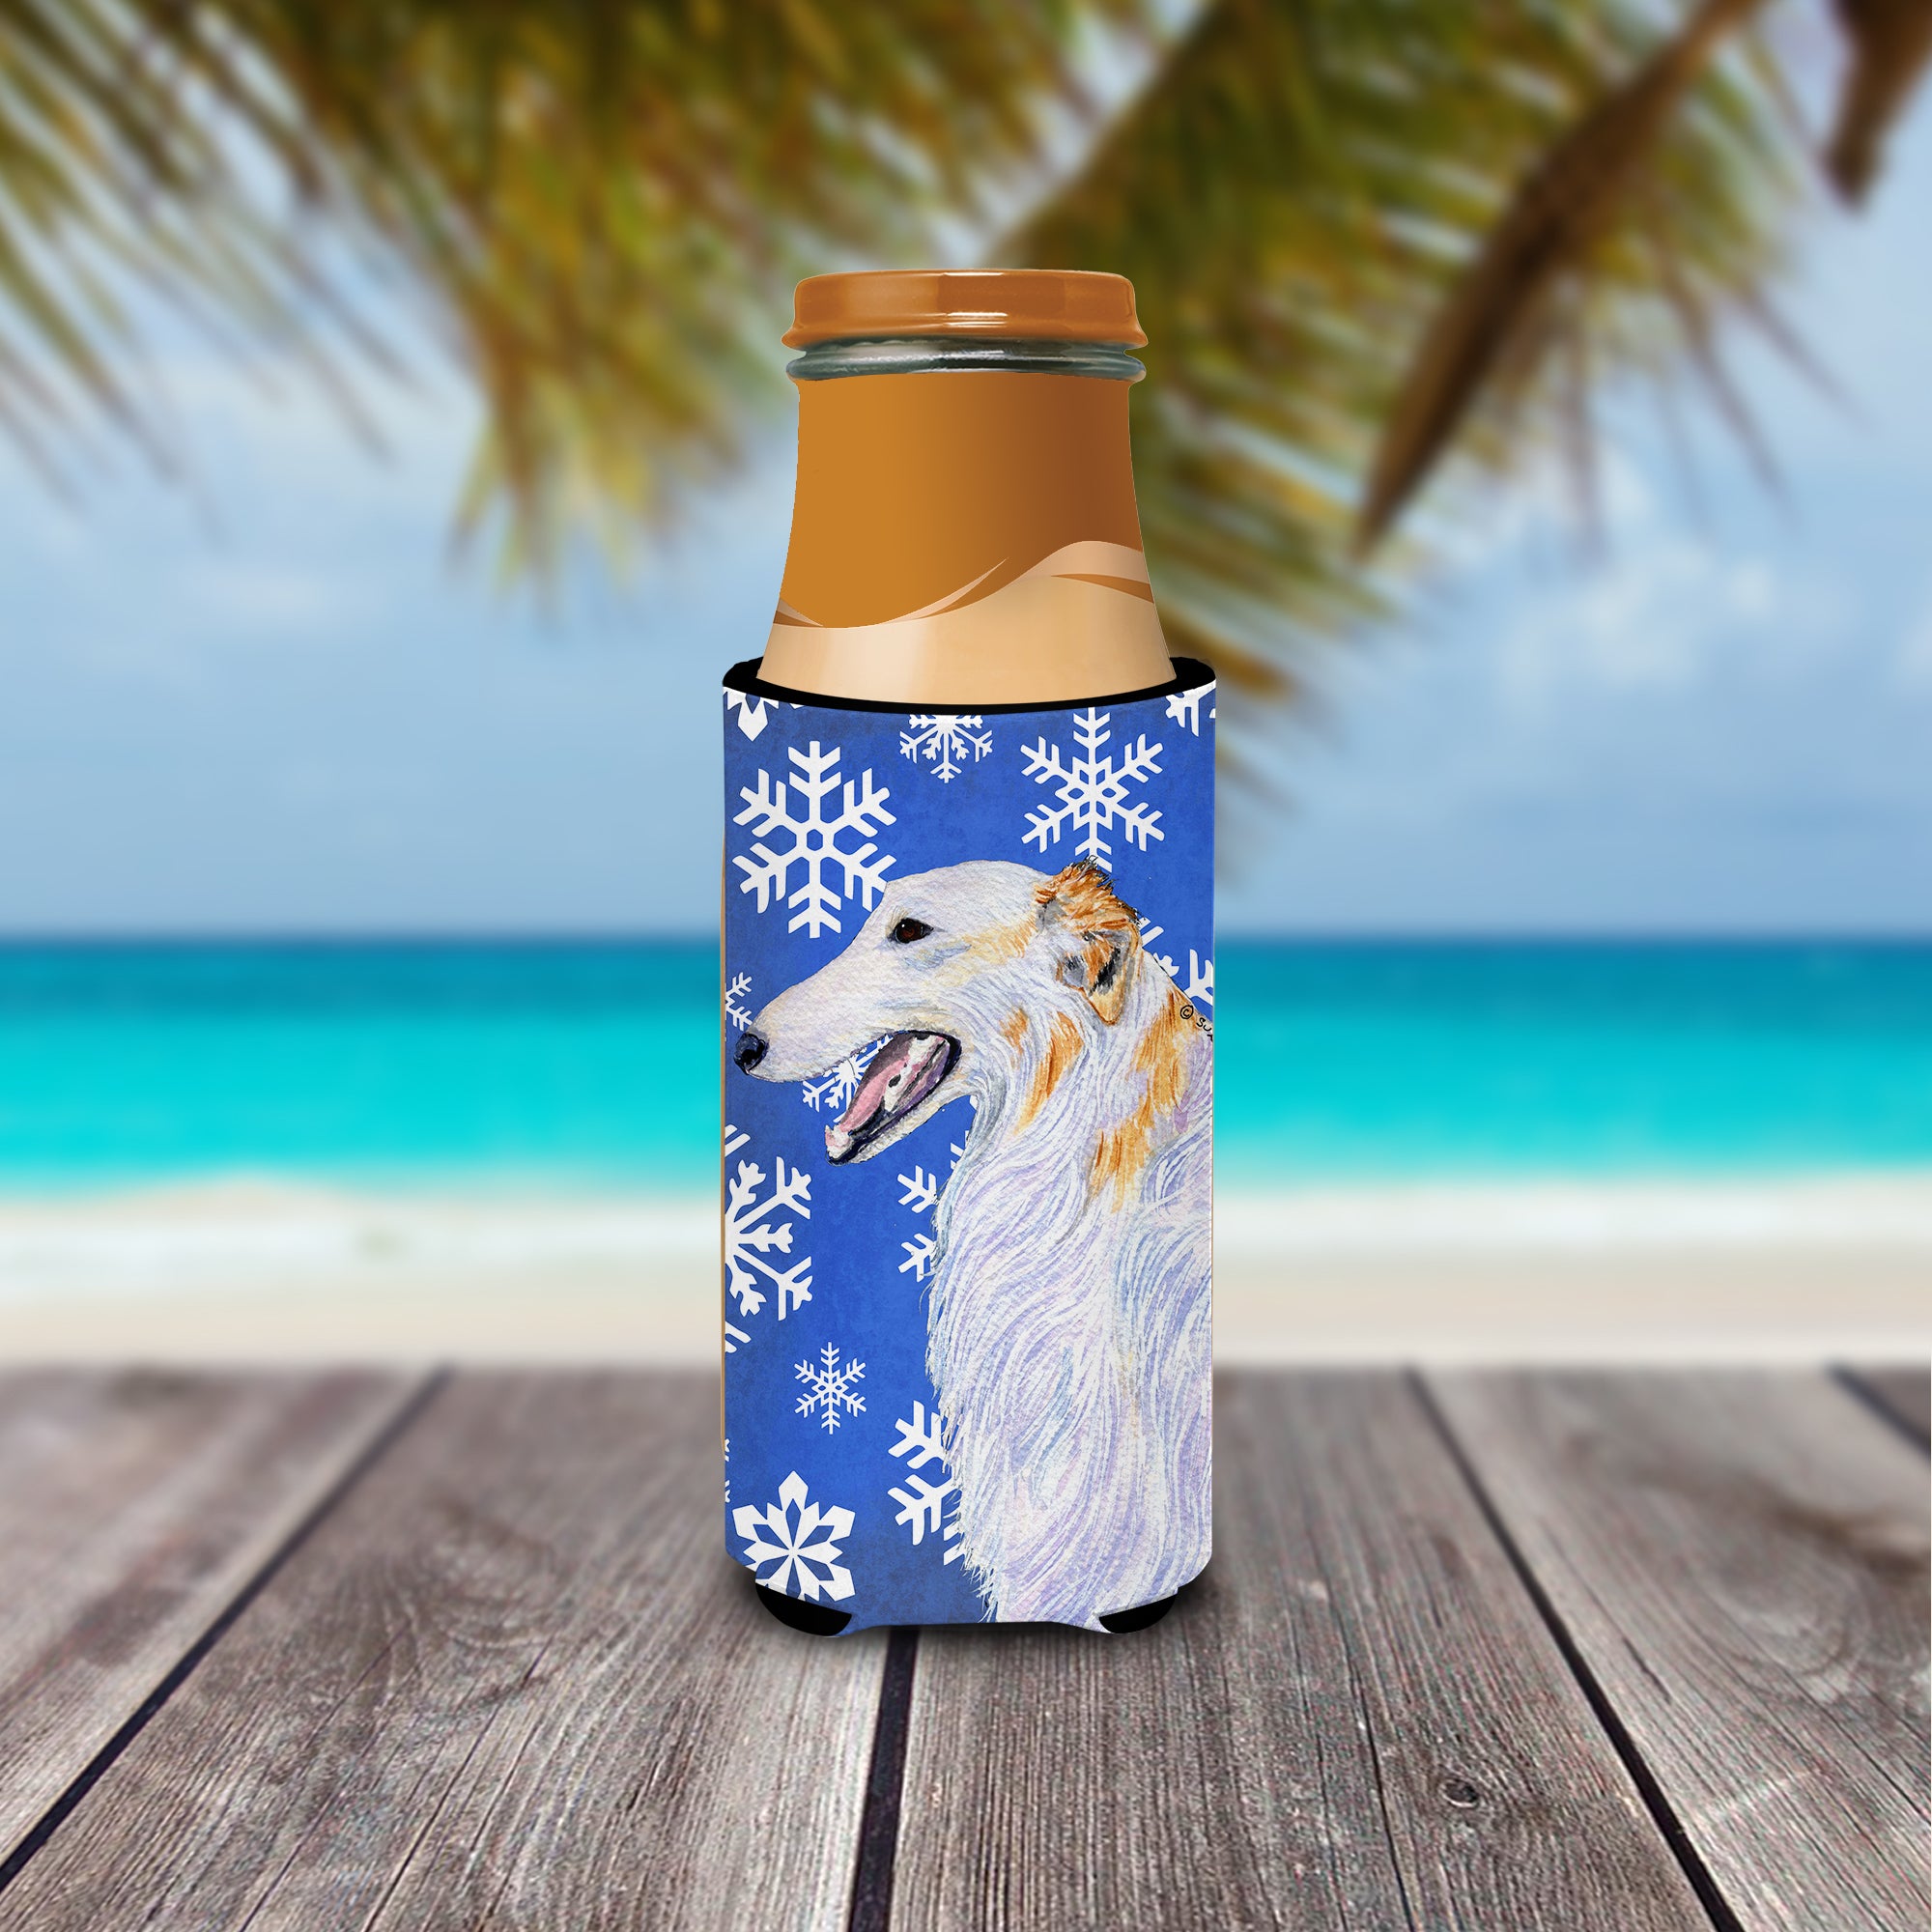 Borzoi Winter Snowflakes Holiday Ultra Beverage Insulators for slim cans SS4613MUK